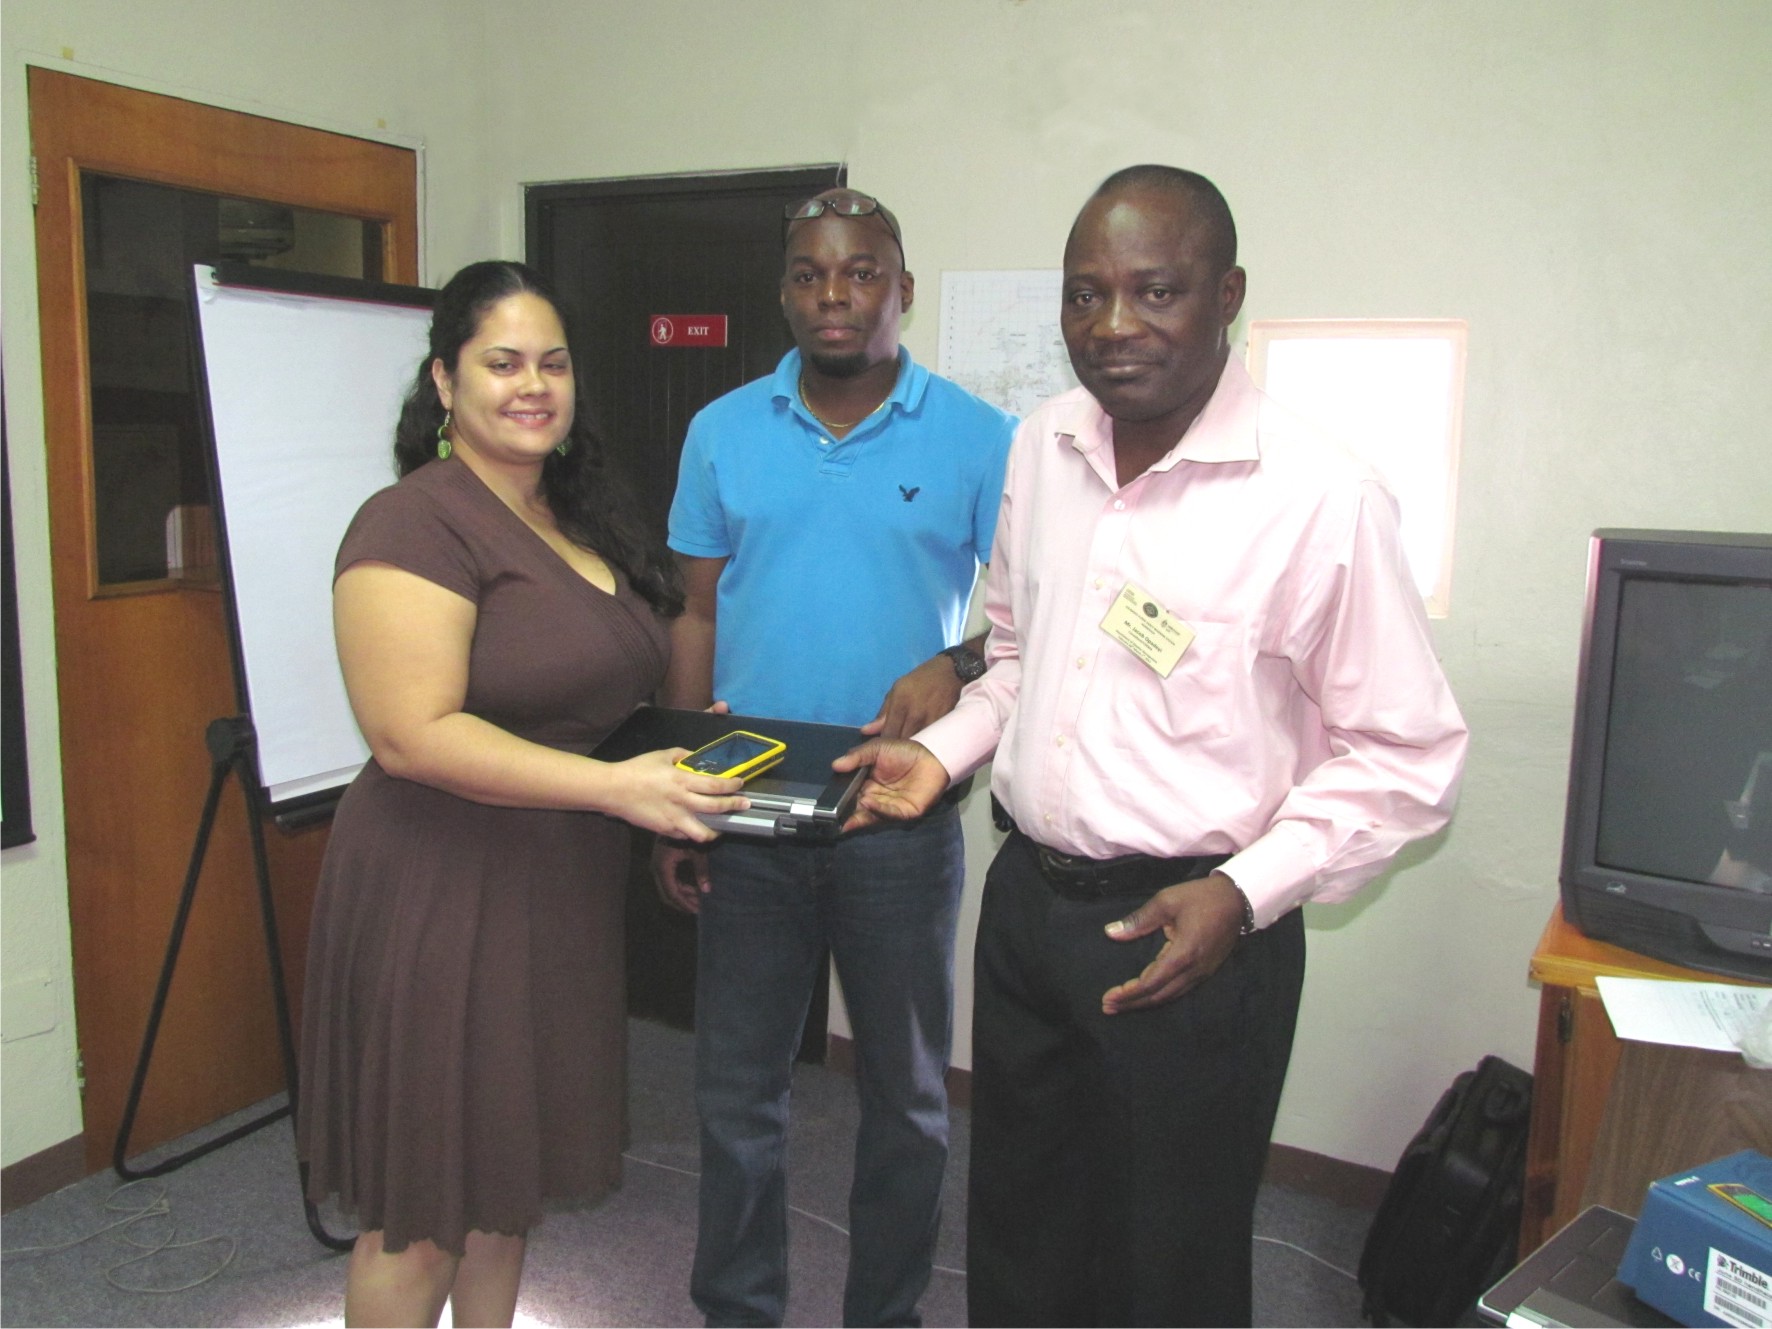 Dr. Jacob Opadeyi, Head of Geometrics Engineering and Land Management at the University of the West Indies, Trinidad and Tobago hands over Mobile ArcPad Computer and a JUNO handheld GPS system to Ms. Garymar Rivera, Senior Technical Planning Manager at the Department of Disaster Management, Virgin Islands. Mr. Seon Levius (middle), Information and Communication Technologies (ICT) Specialist Manager and representative from CDEMA was present during the presentation